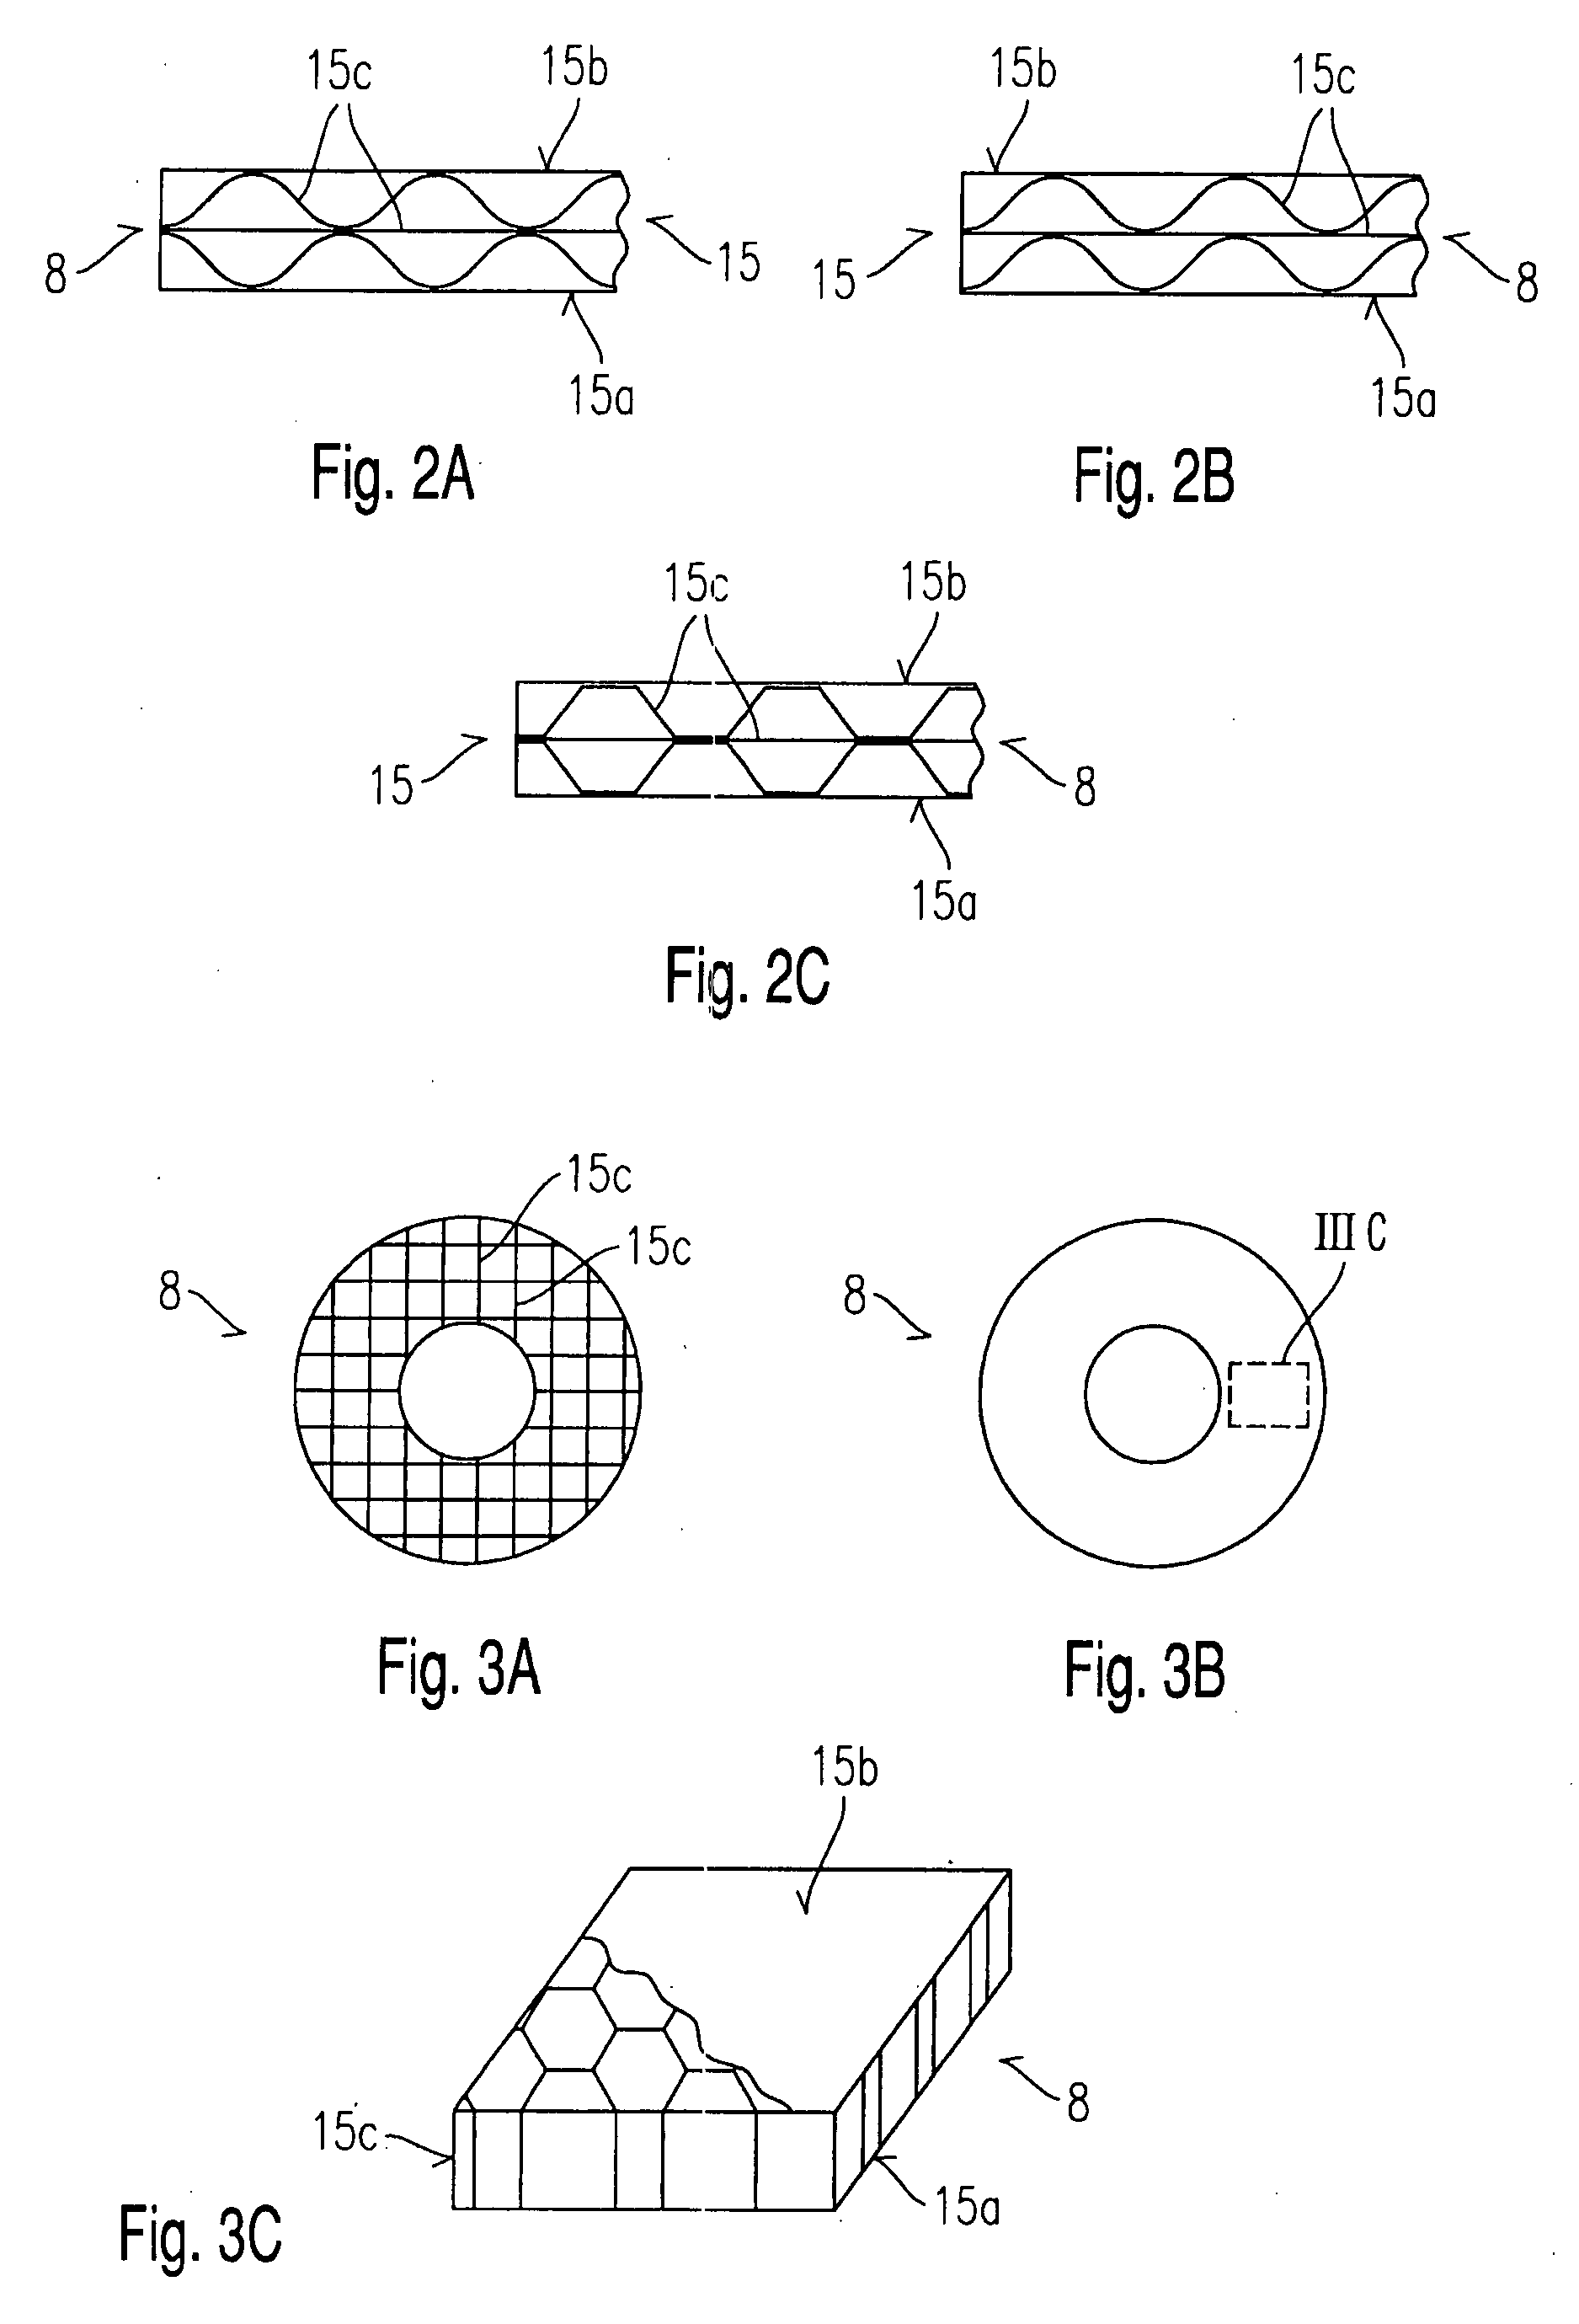 Intermediate Element for a Fuel Injector